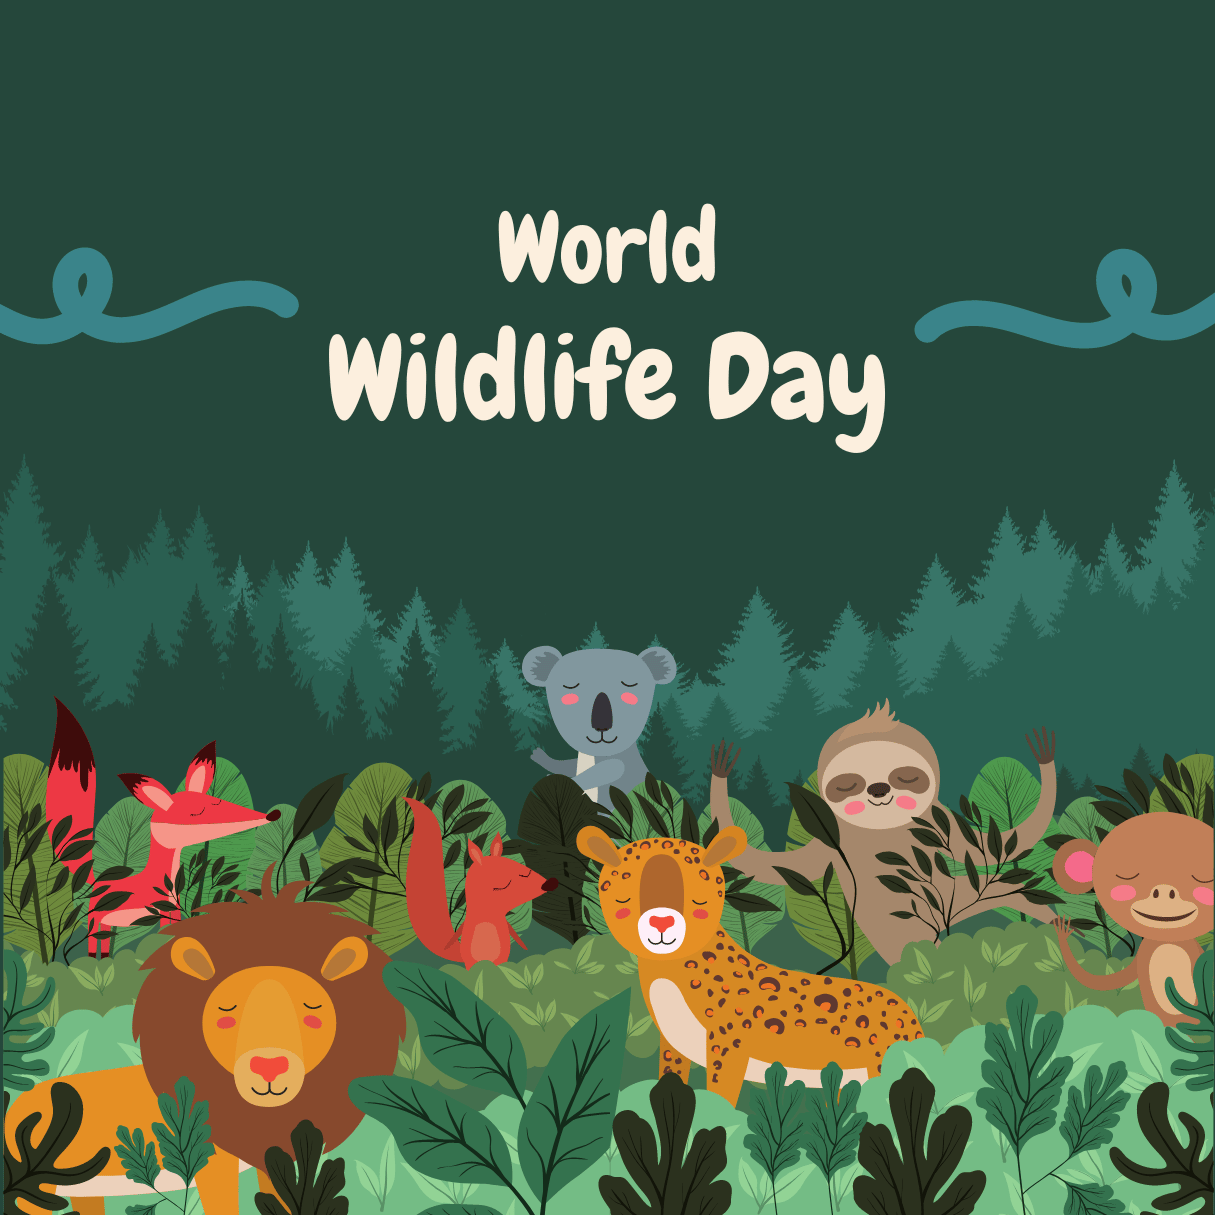 World Wildlife Day preview image.